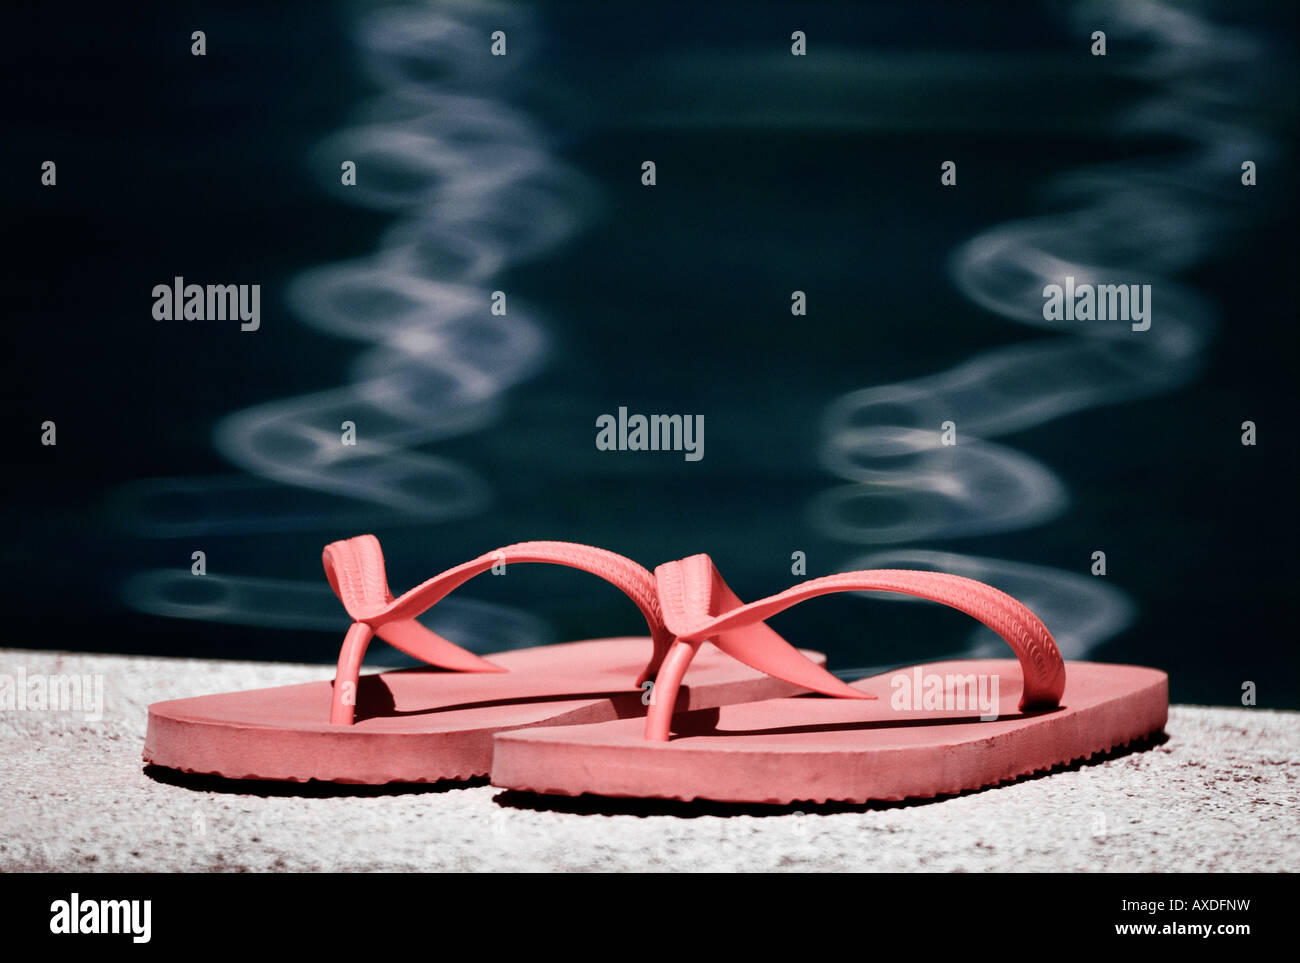 Closeup view of flip flops by the pool Stock Photo